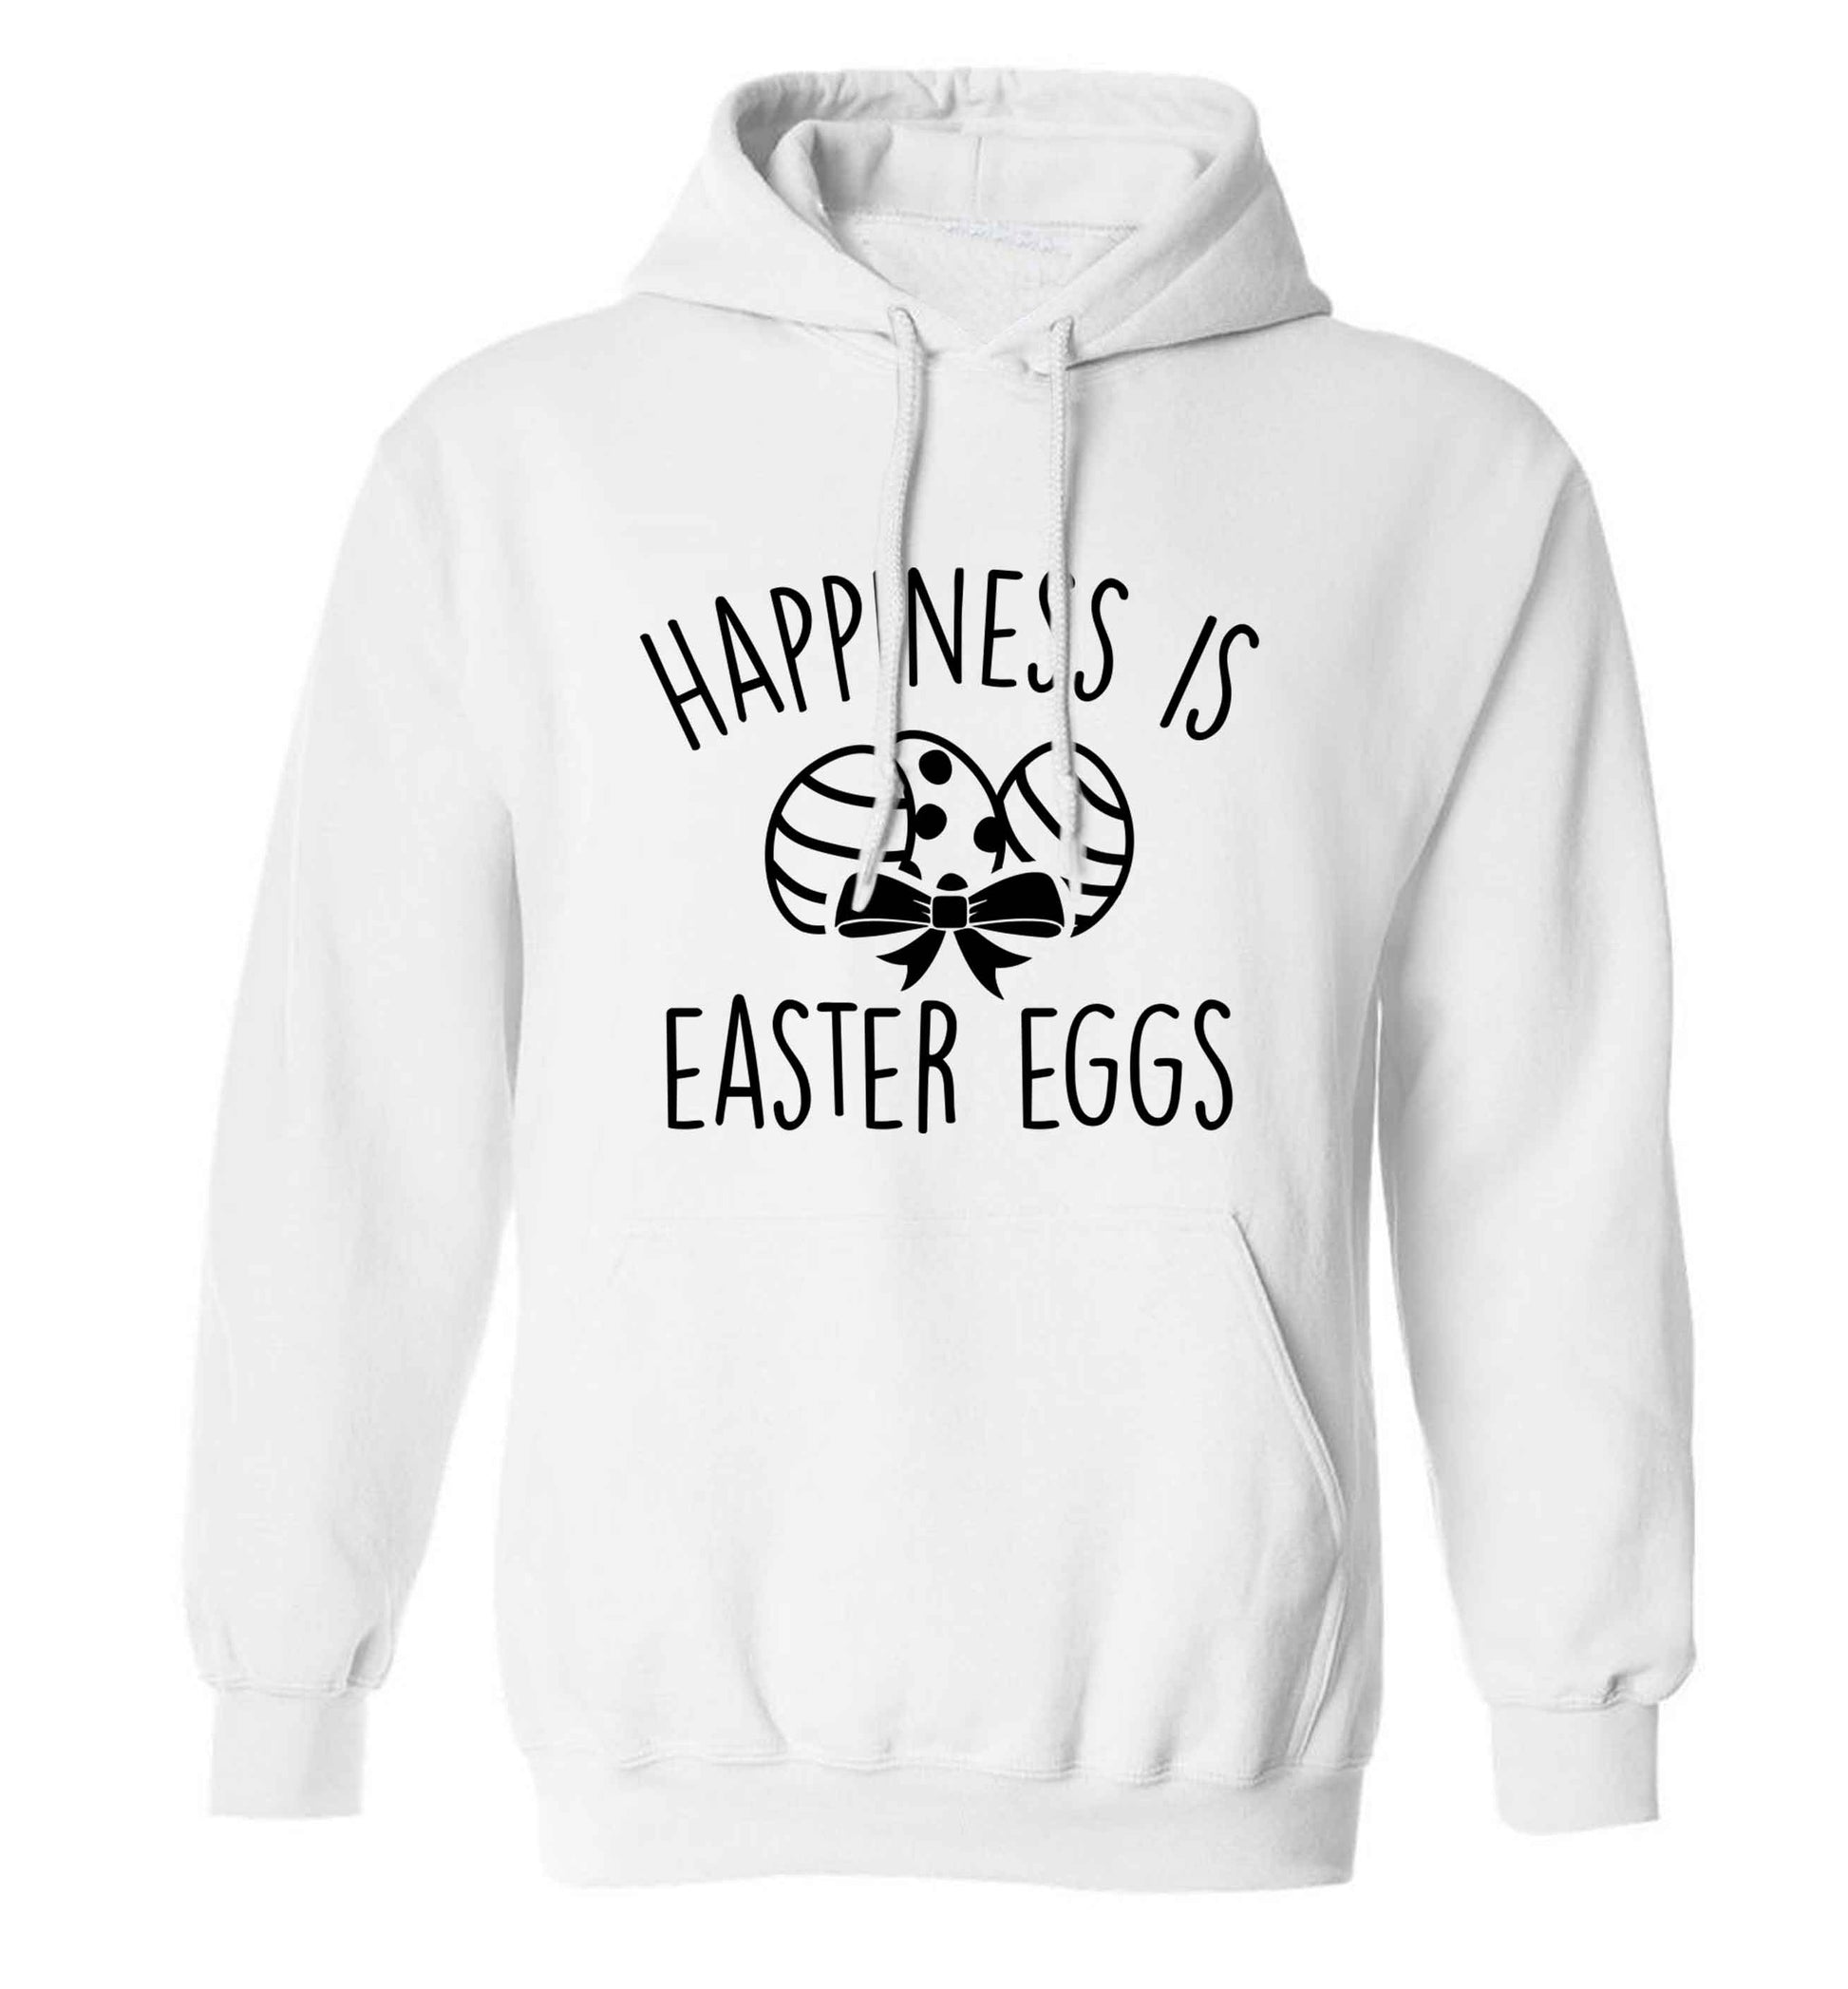 Happiness is Easter eggs adults unisex white hoodie 2XL